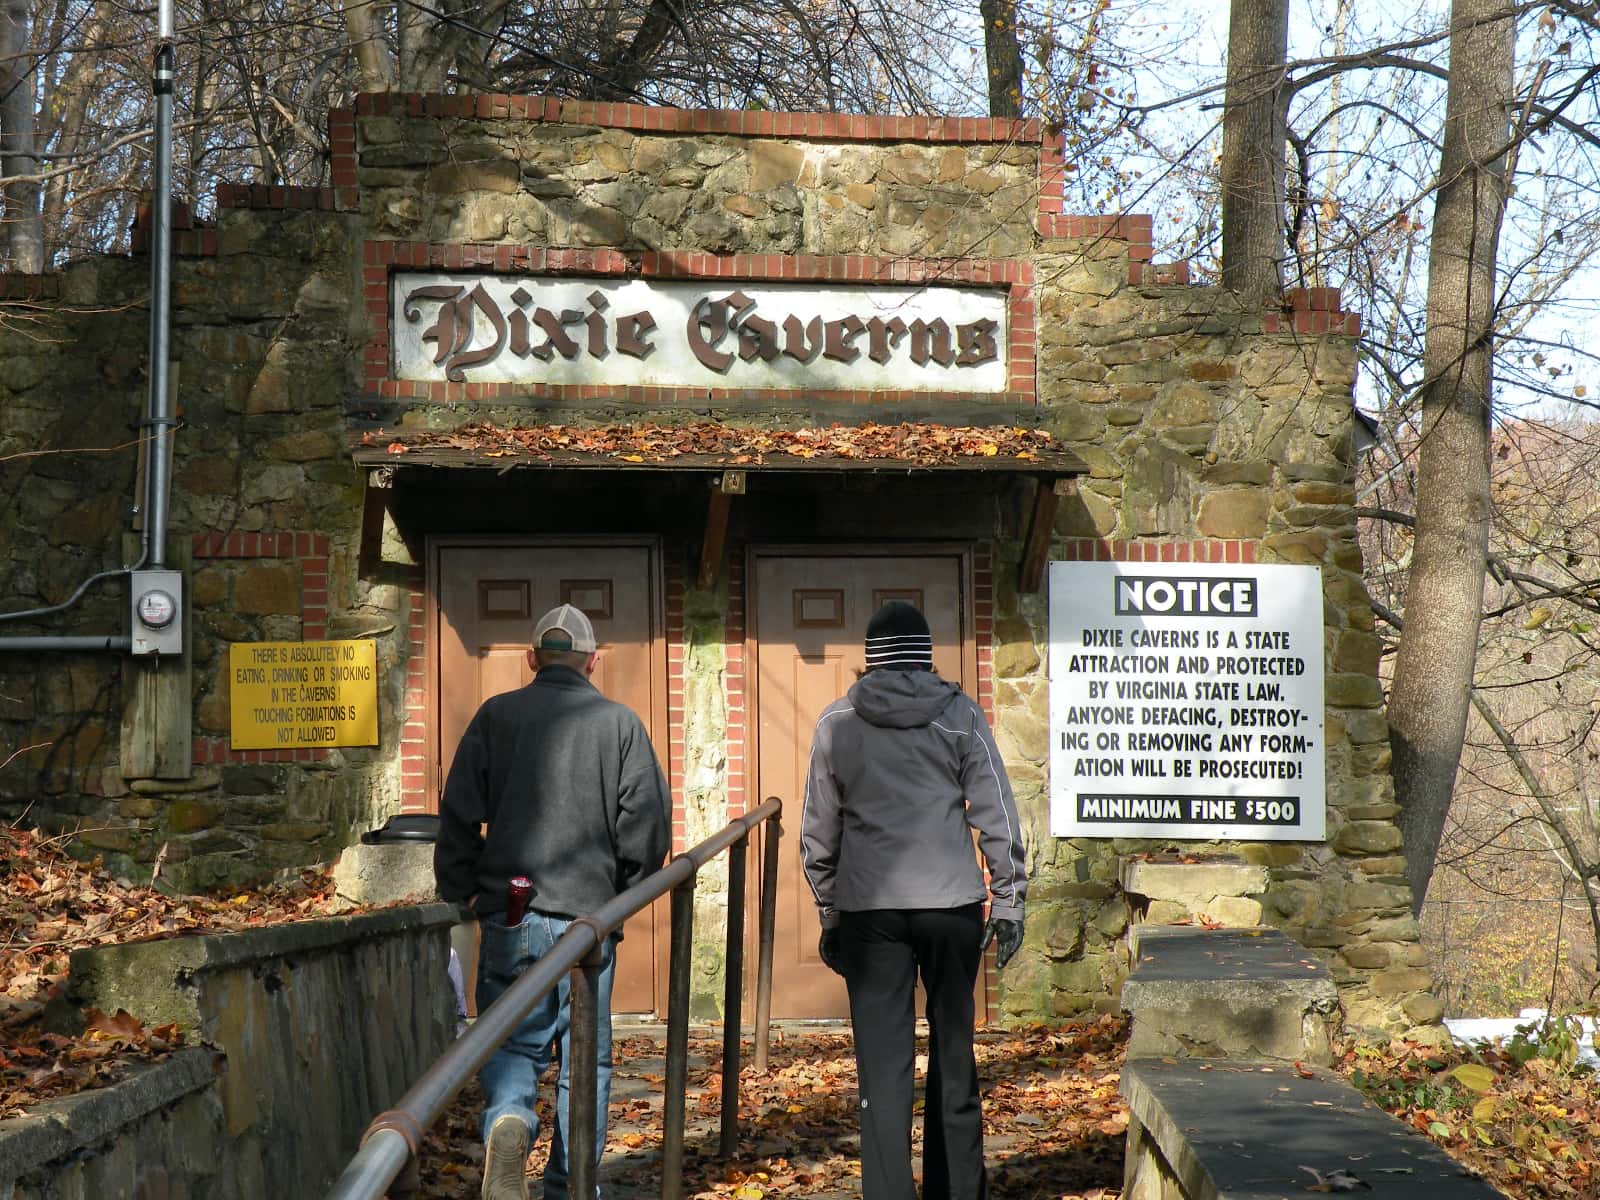 Two people walking towards entrance of Dixie Caverns